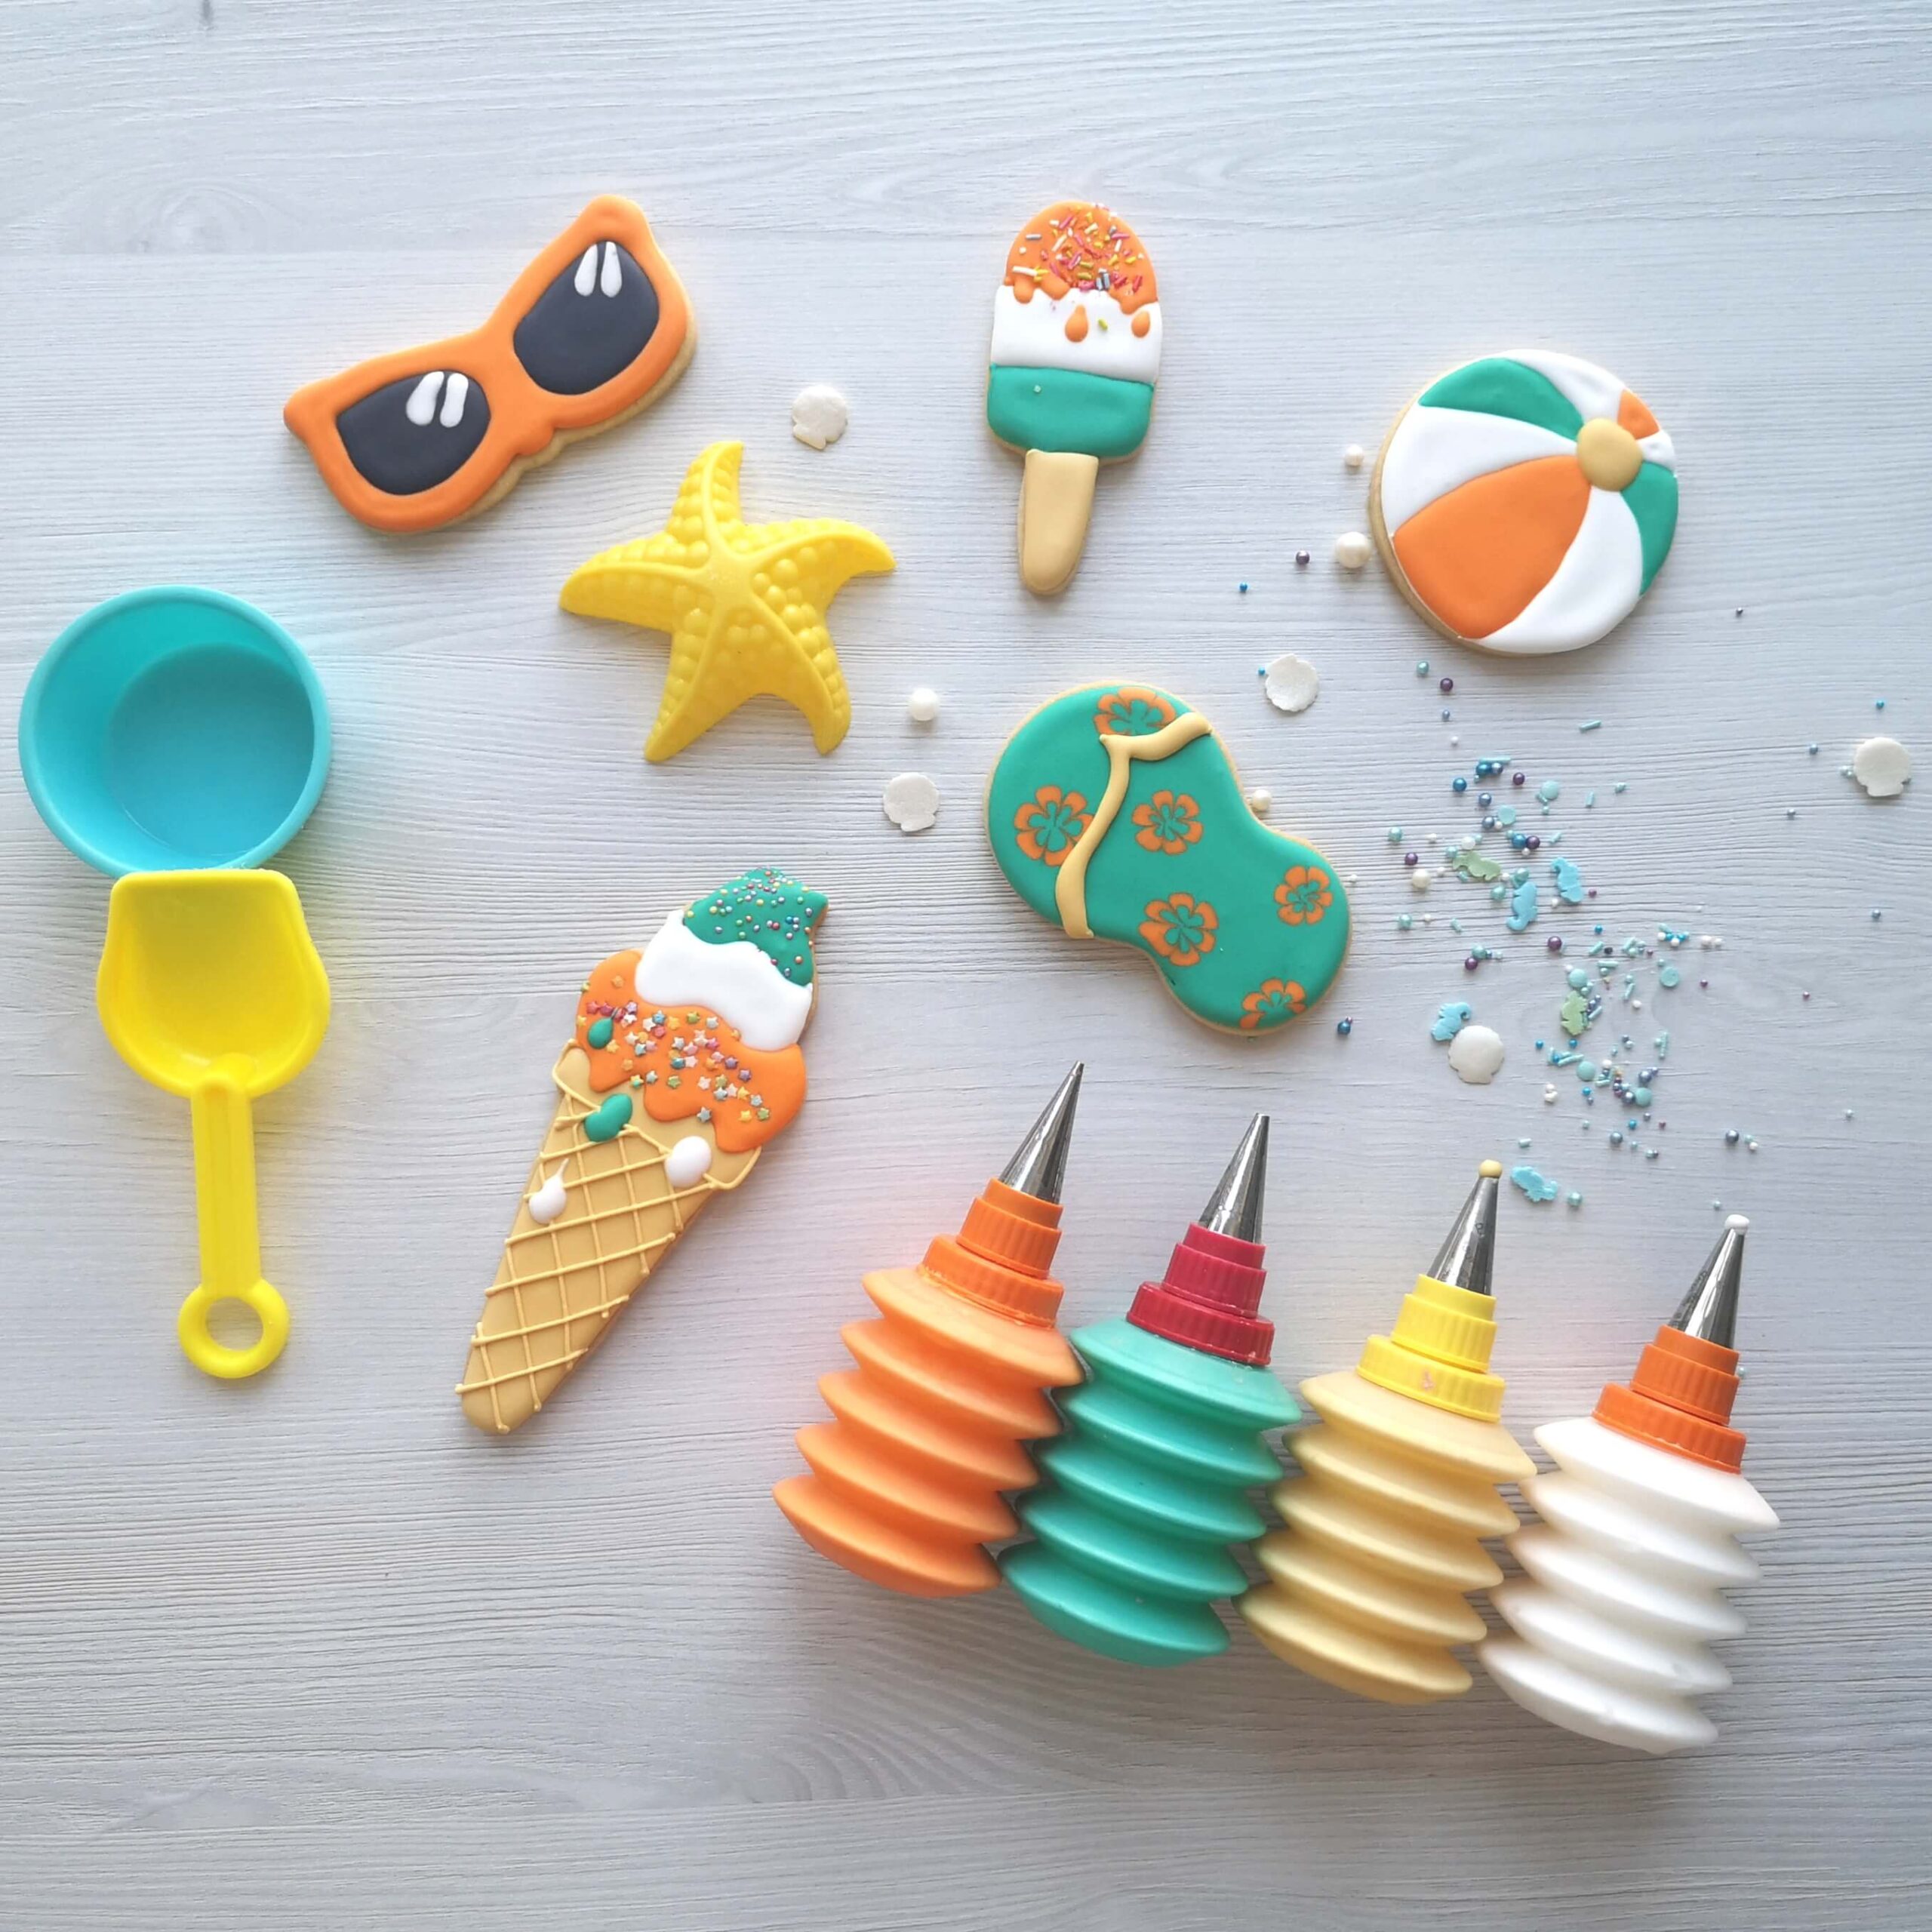 Summer Fun biscuits with royal icing including sunglasses, beach ball, lollipop, ice cream and flip flop